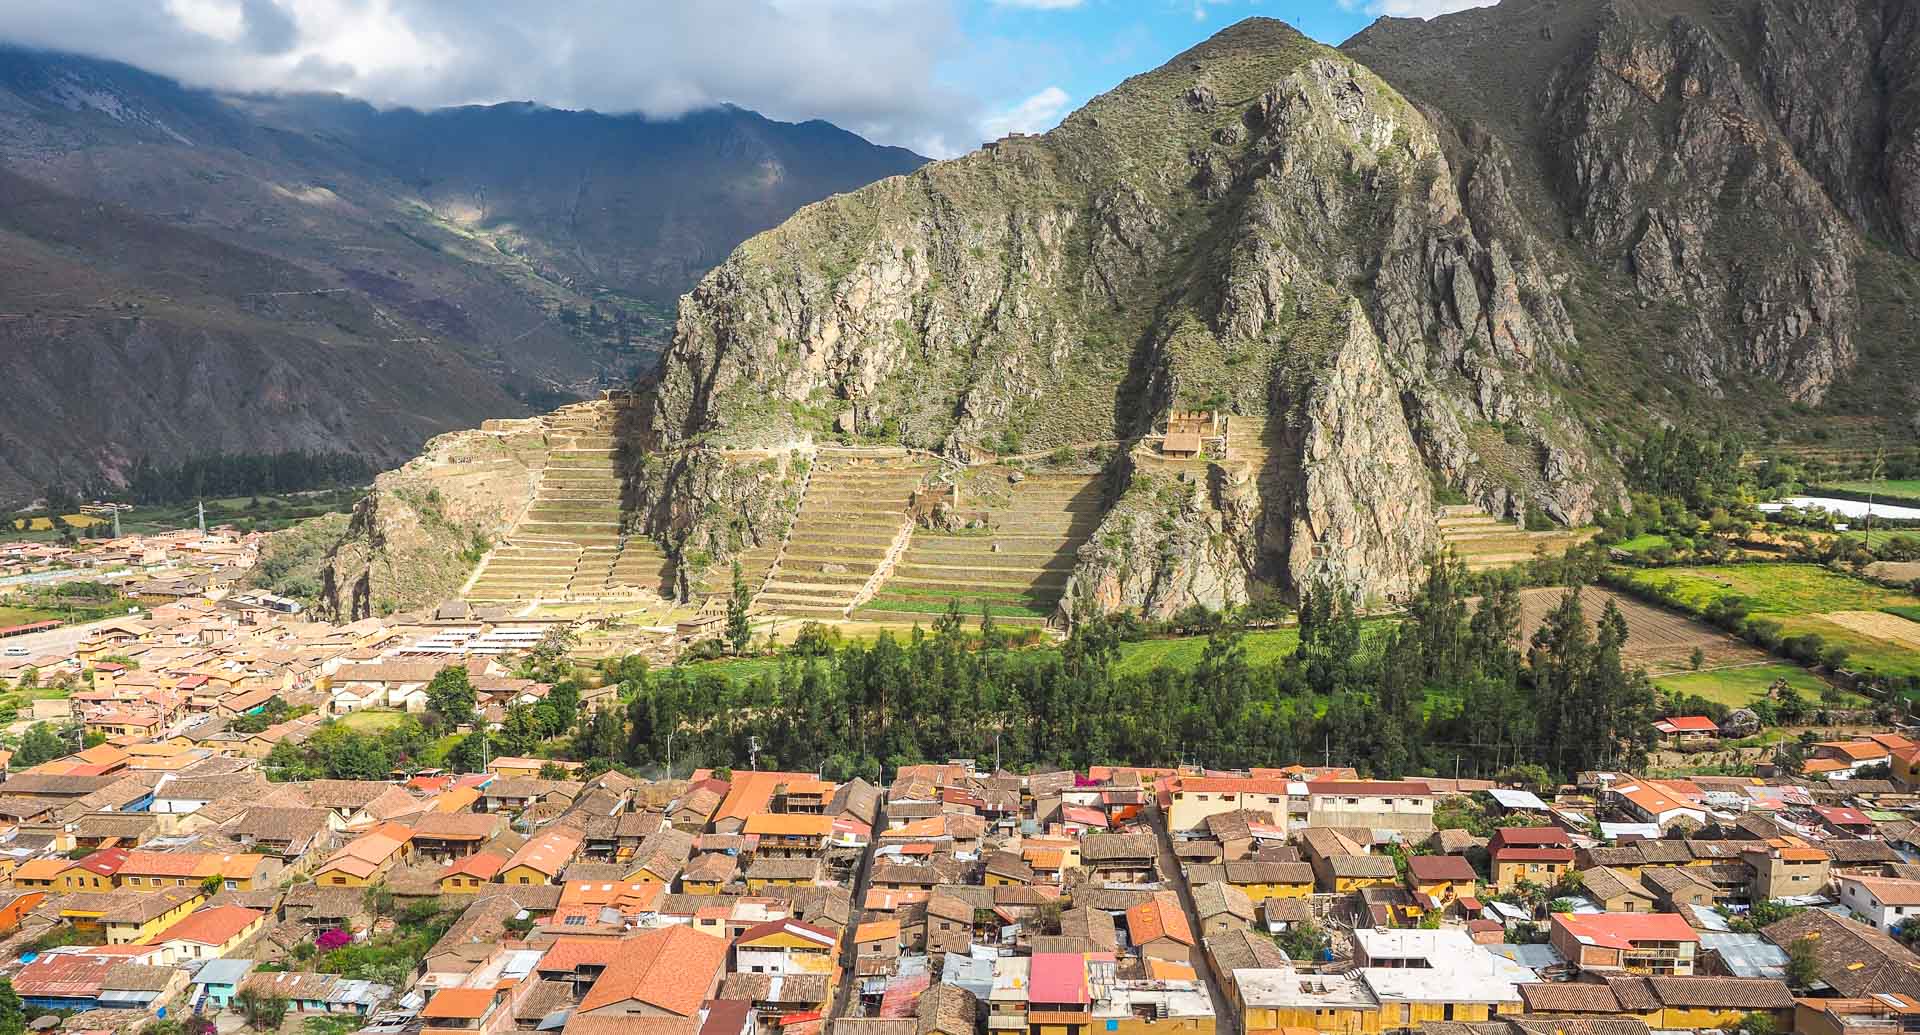 A guide to the top sights and attractions in Ollantaytambo